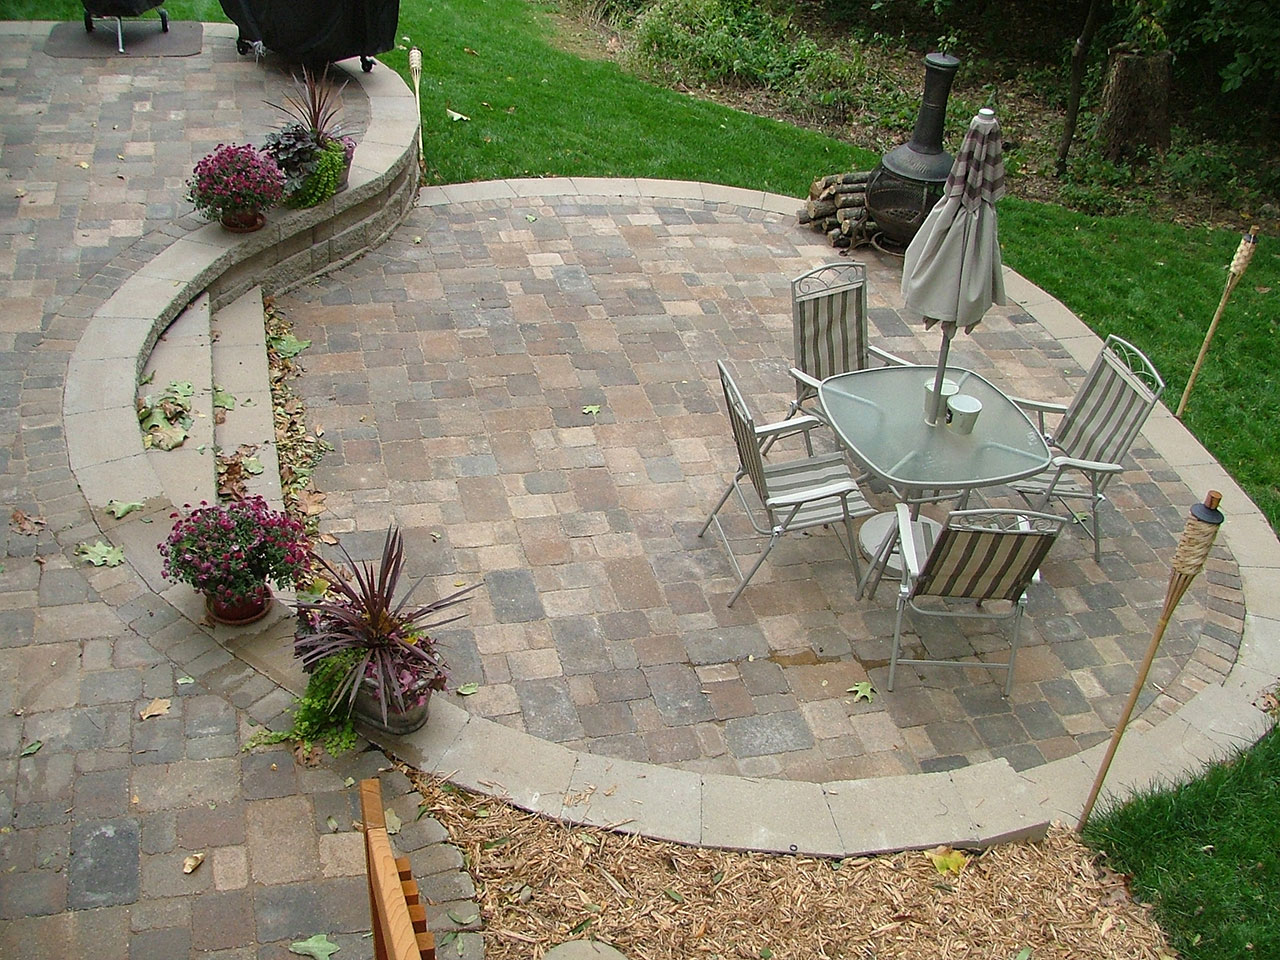 Paver Patio Contemporary Small Paver Patio Ideas With Contemporary Design Completed With Steel Patio Furniture And Umbrella For Inspiration Backyard Paver Patio Ideas For Enchanting Backyard